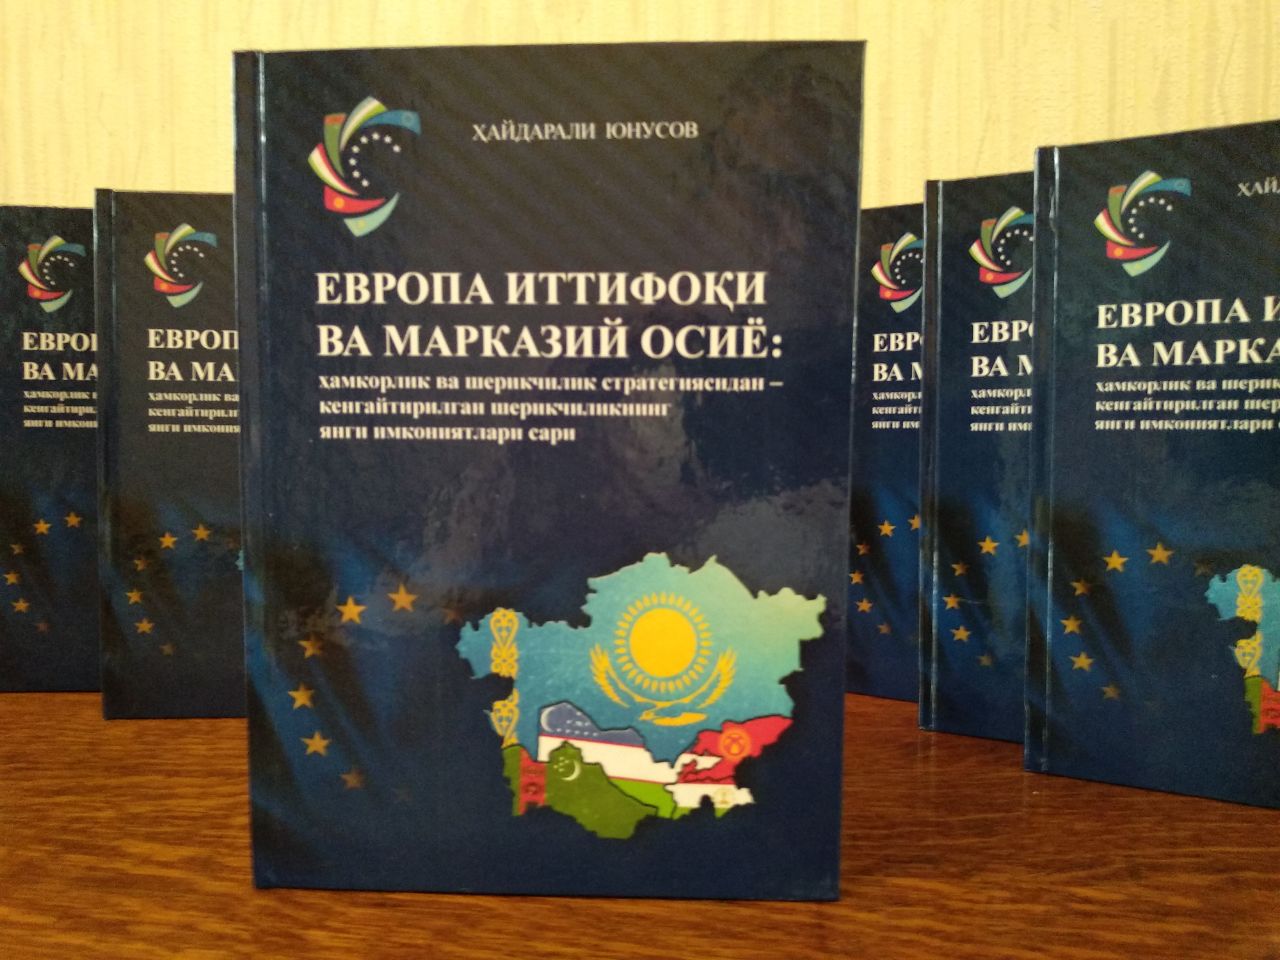 A new book was published: Yunusov Kh. The European Union and Central Asia: From a Strategy of Cooperation and Partnership – Towards New Opportunities for Enhanced Partnership